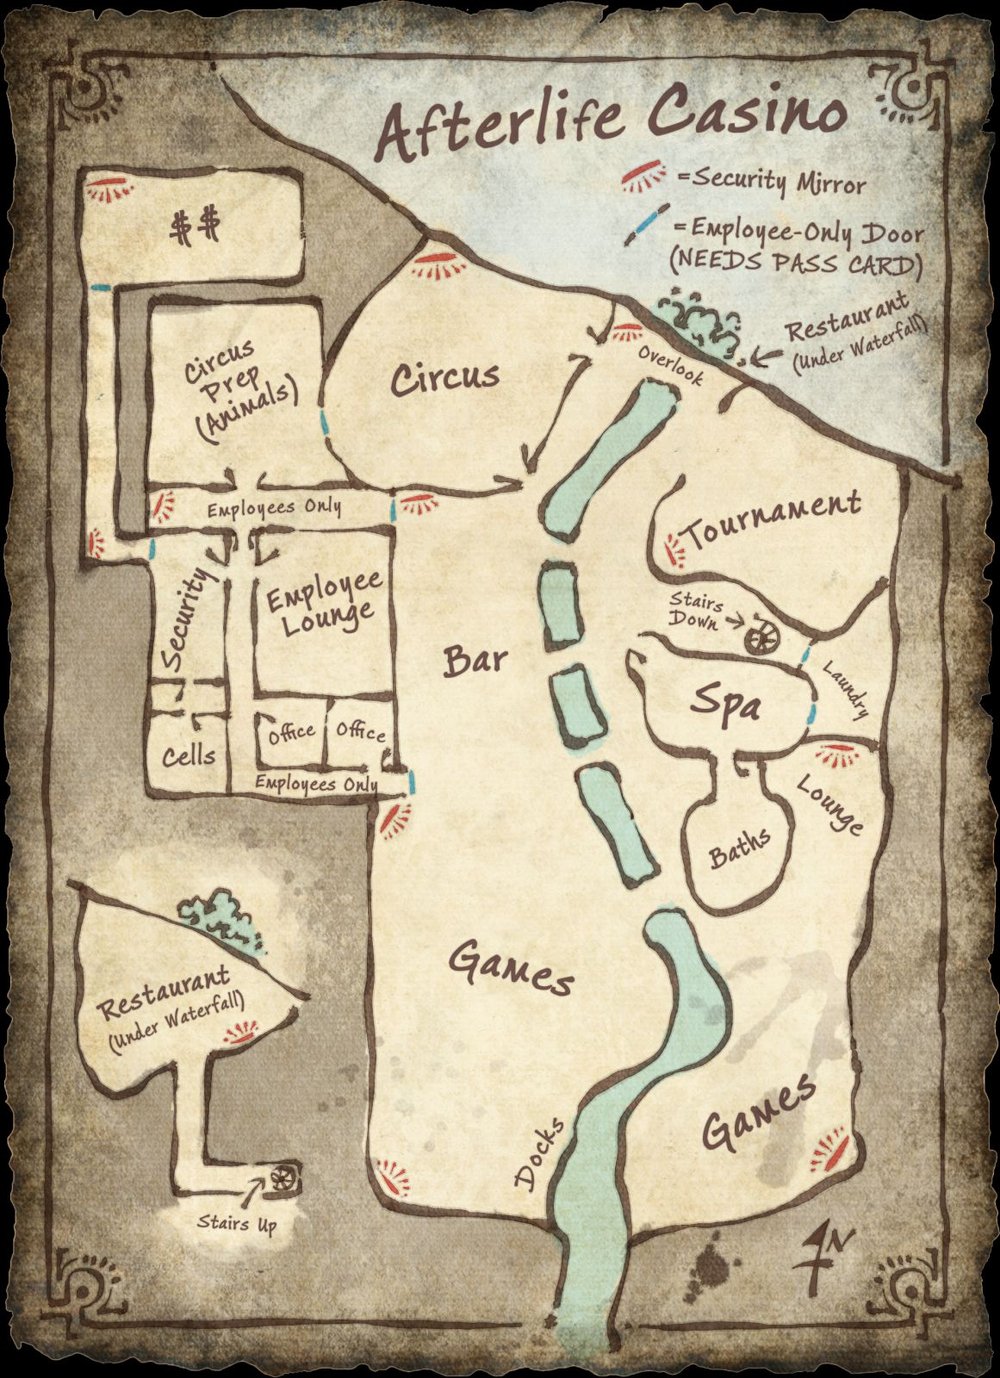 330468_The Stygian Gambit—PLAYER'S MAP THE AFTERLIFE CASINO_ Art By Mike Schley.jpg